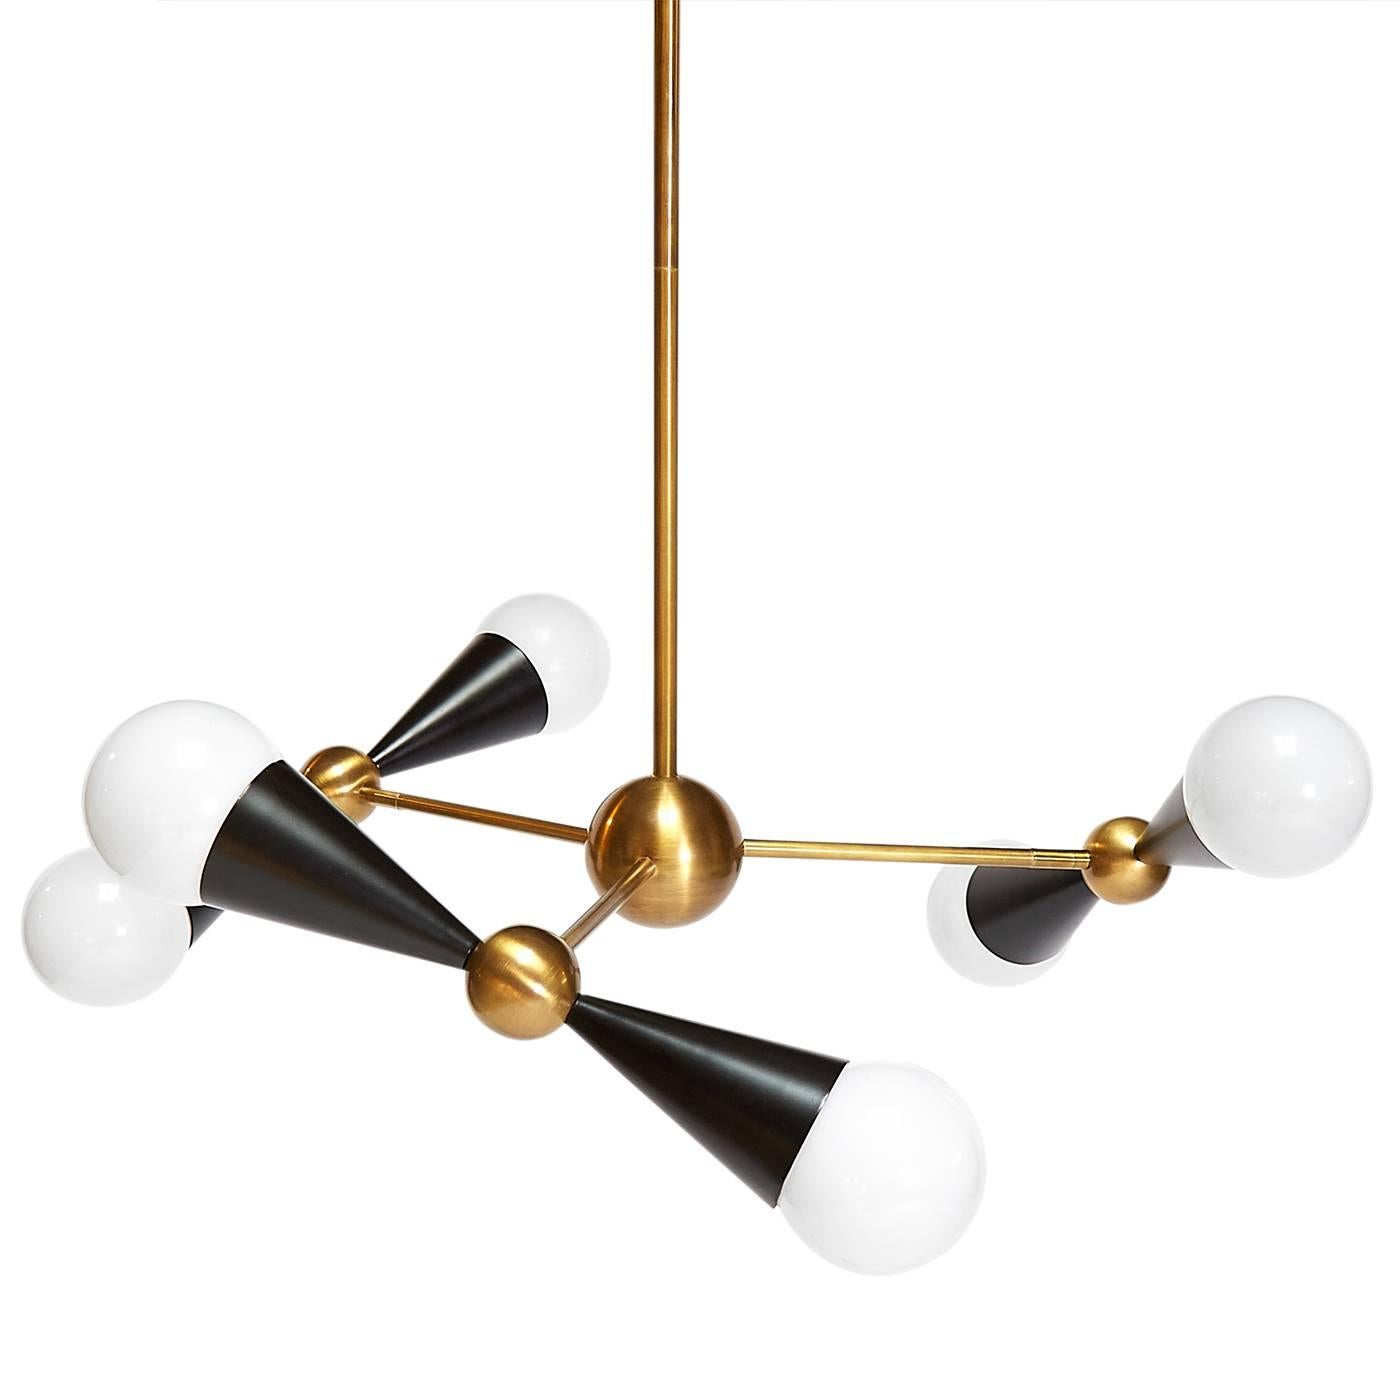 Kinetic modernism. Simple geometric shapes, cones and spheres, collide with dynamic results in our Caracas six-light chandelier. The three arms offer countless configurations, vertical for a classic vibe, horizontal for a more streamlined look, or